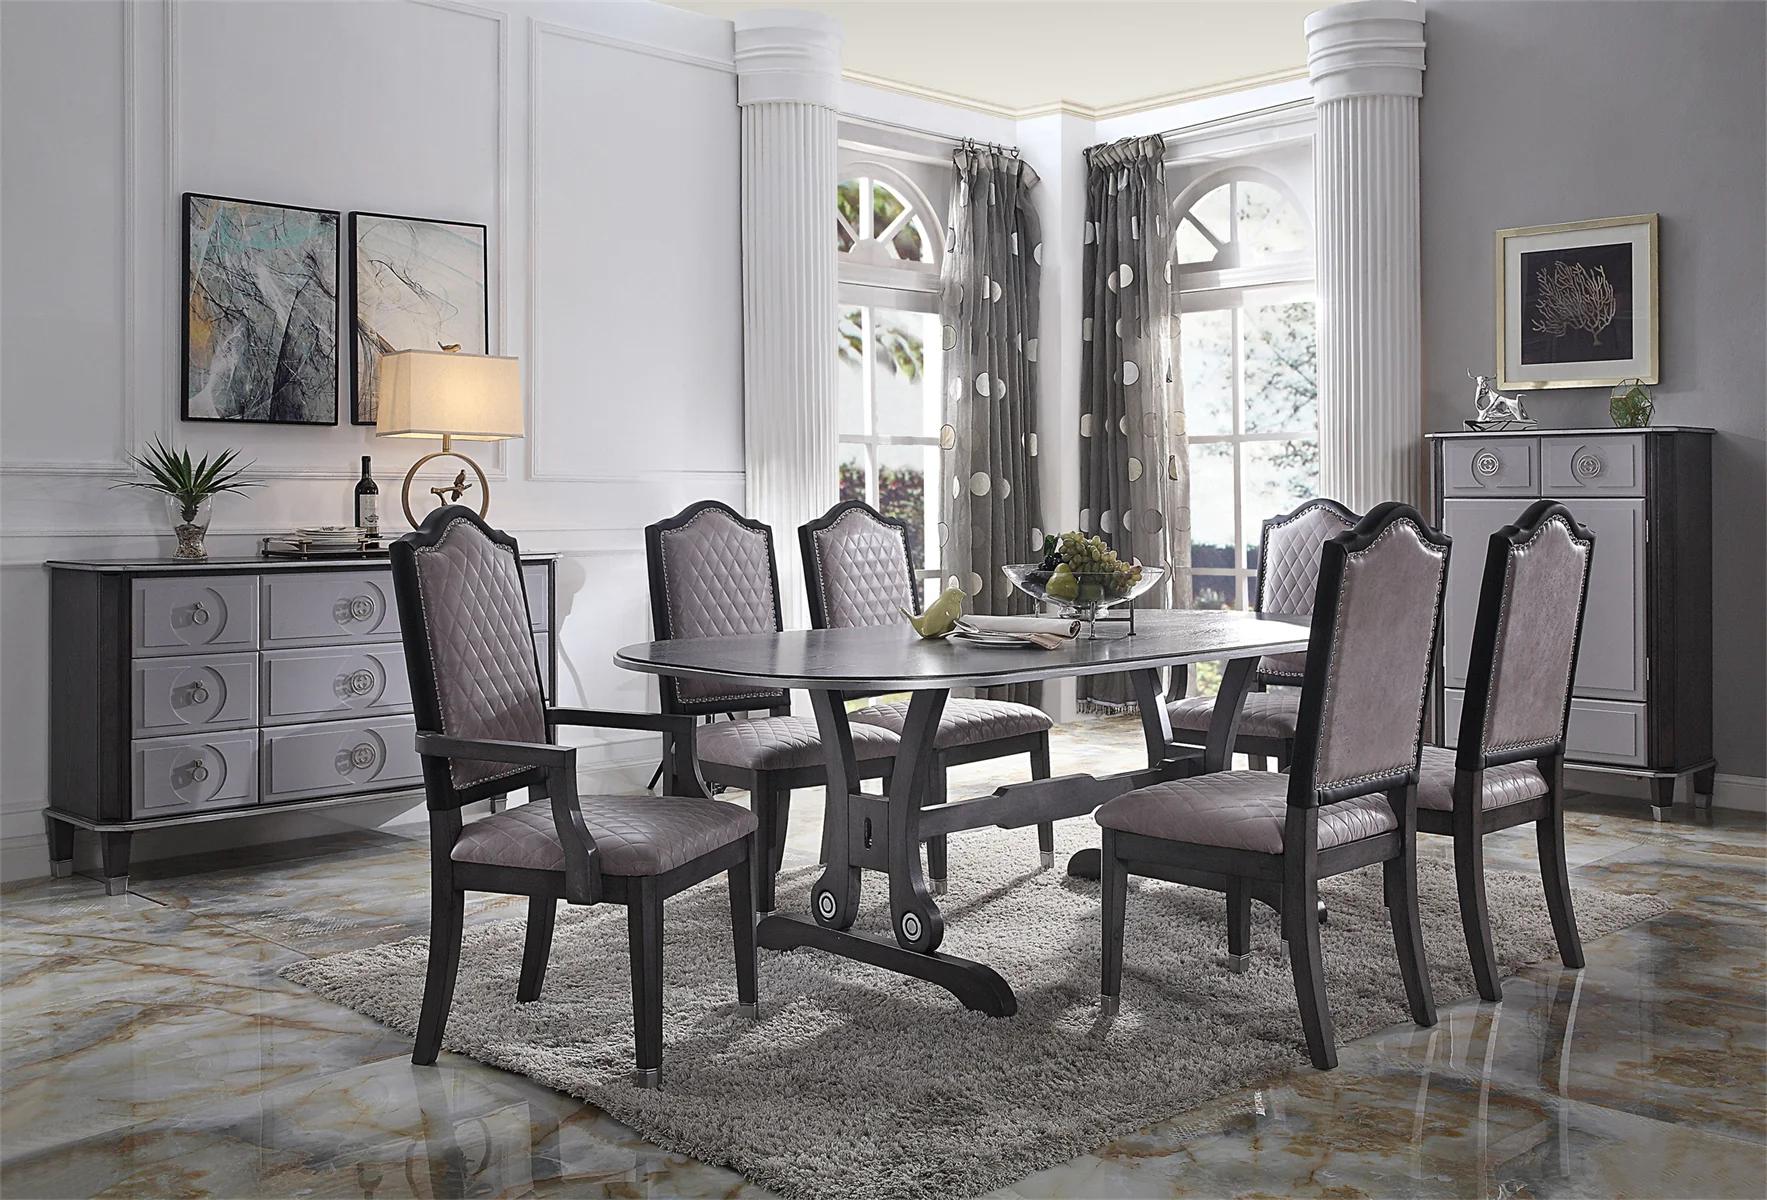 

    
Transitional Charcoal 9pcs Dining Room Set by Acme House Beatrice 68810-9pcs
